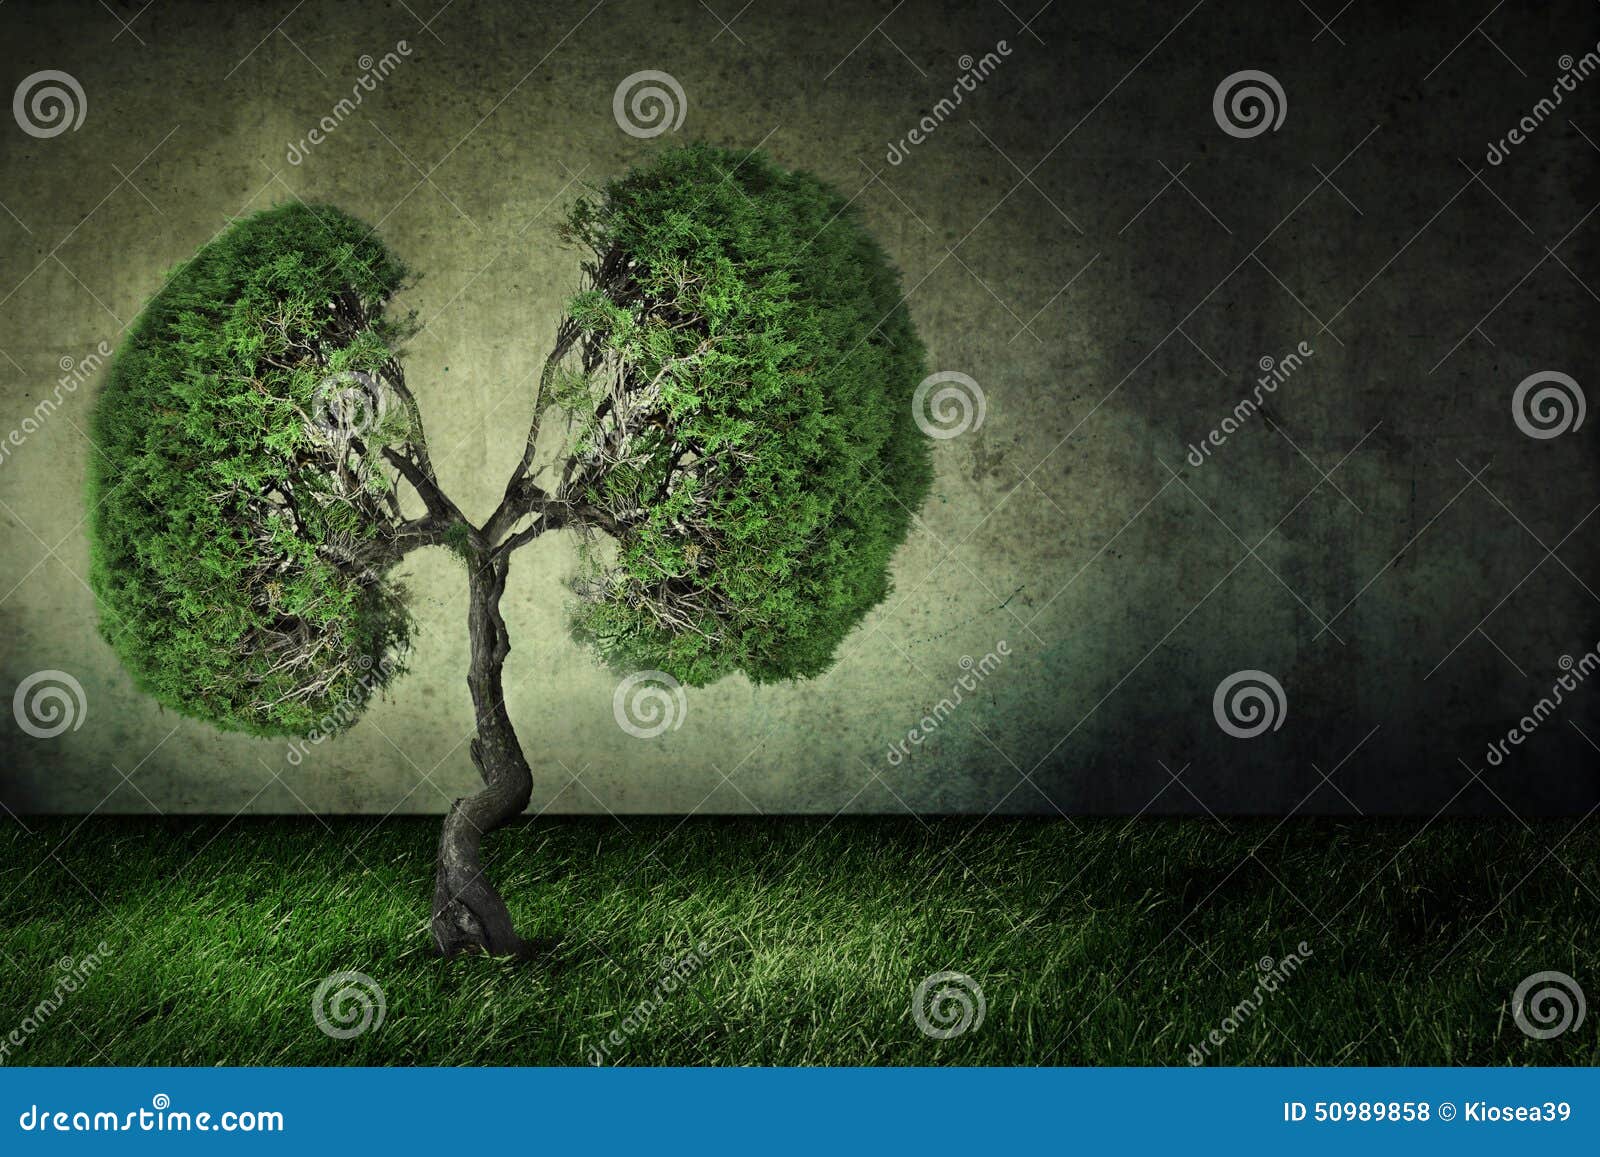 conceptual image of green tree d like human lungs